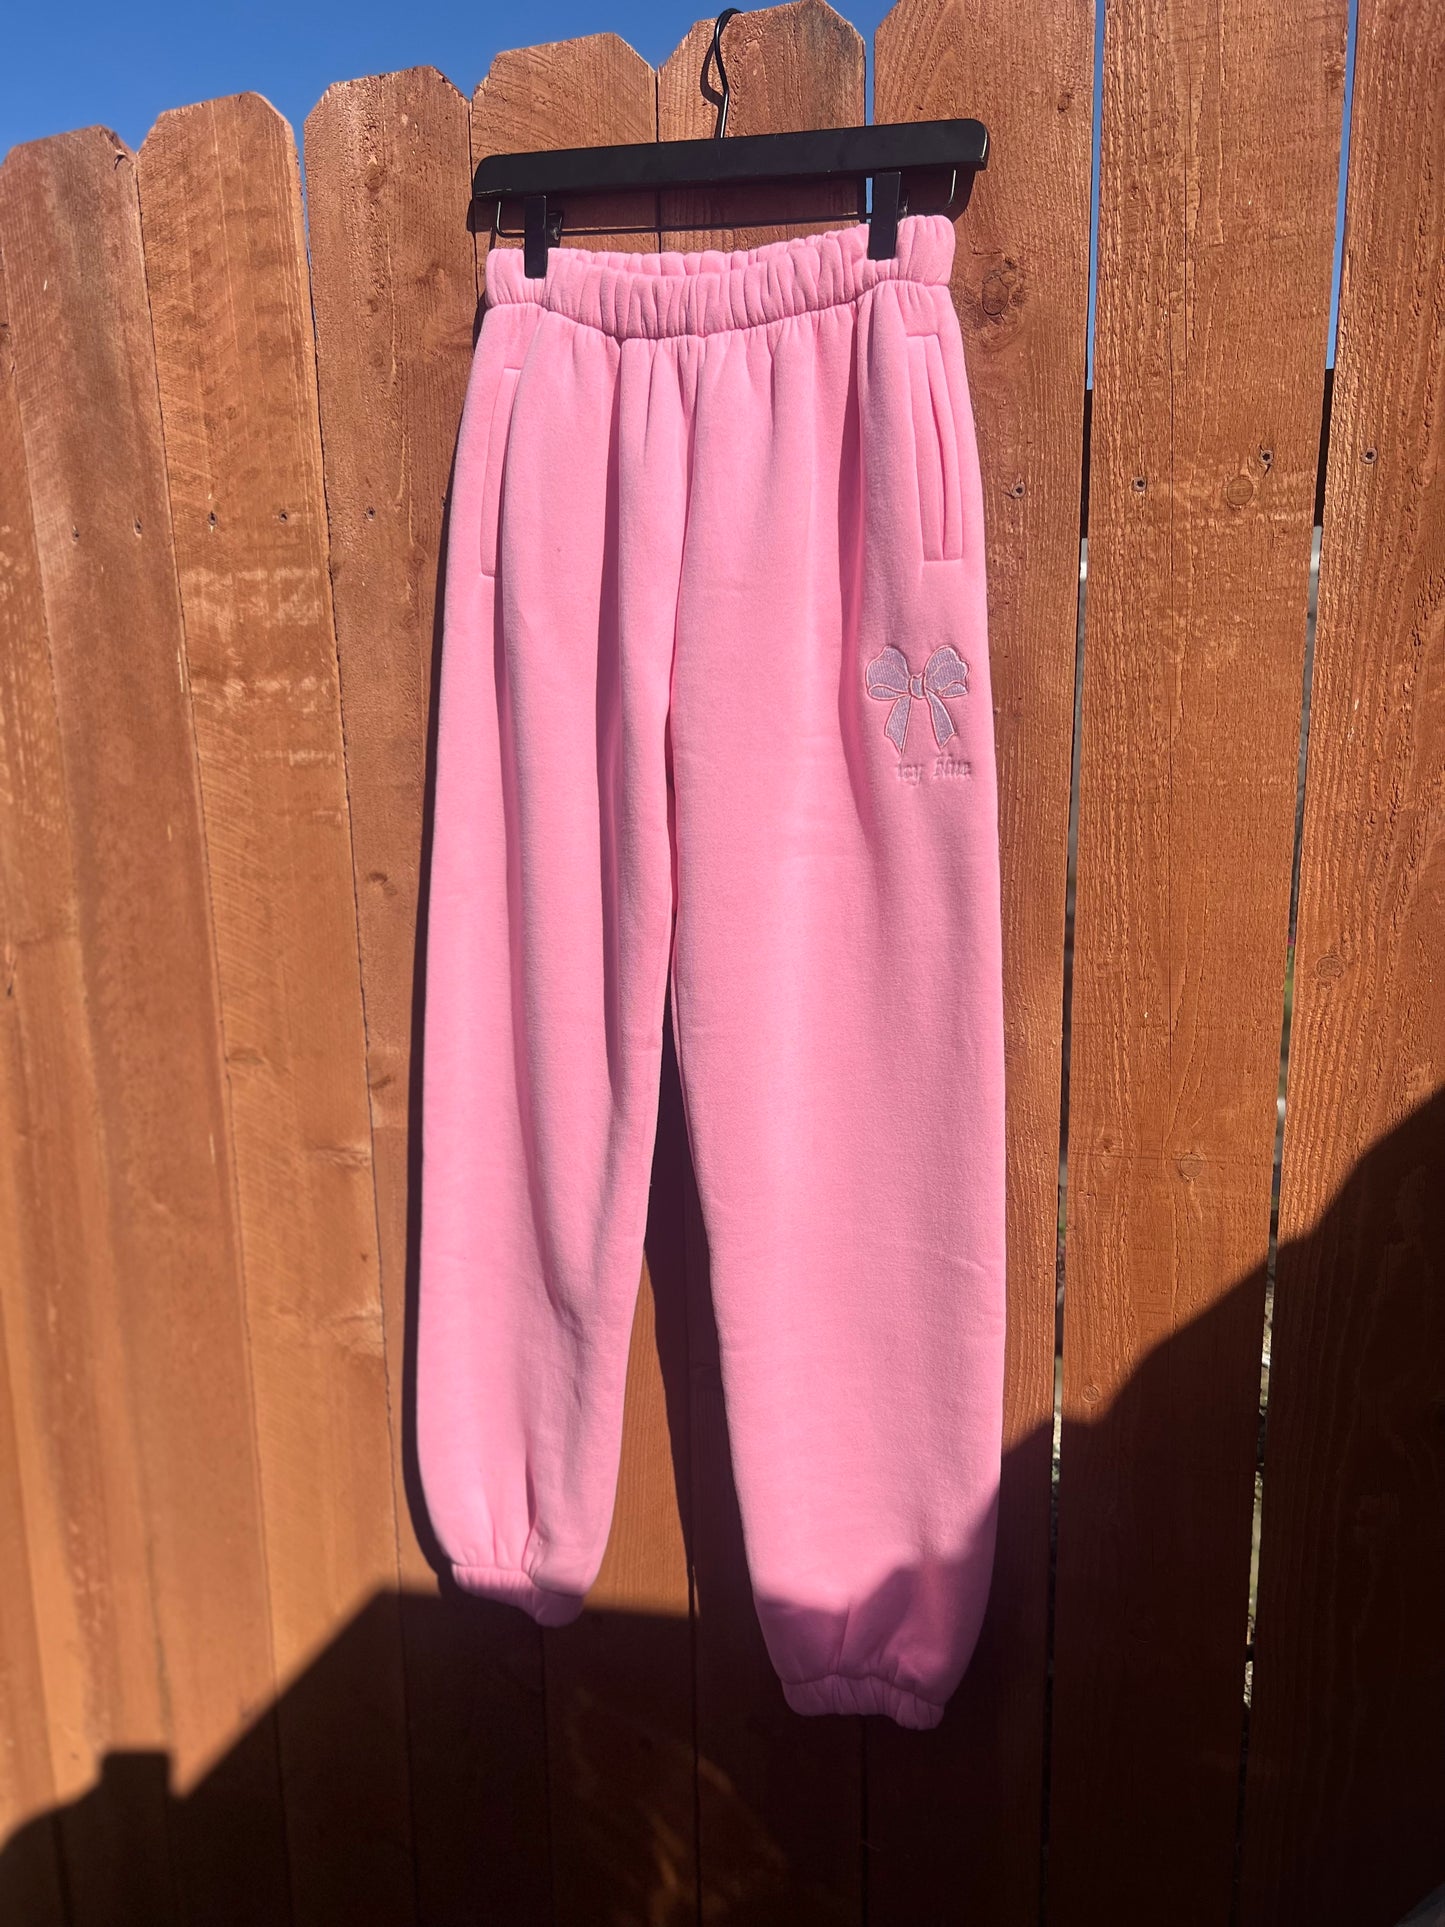 Icy Girl Sweatsuit Size Small 🎀